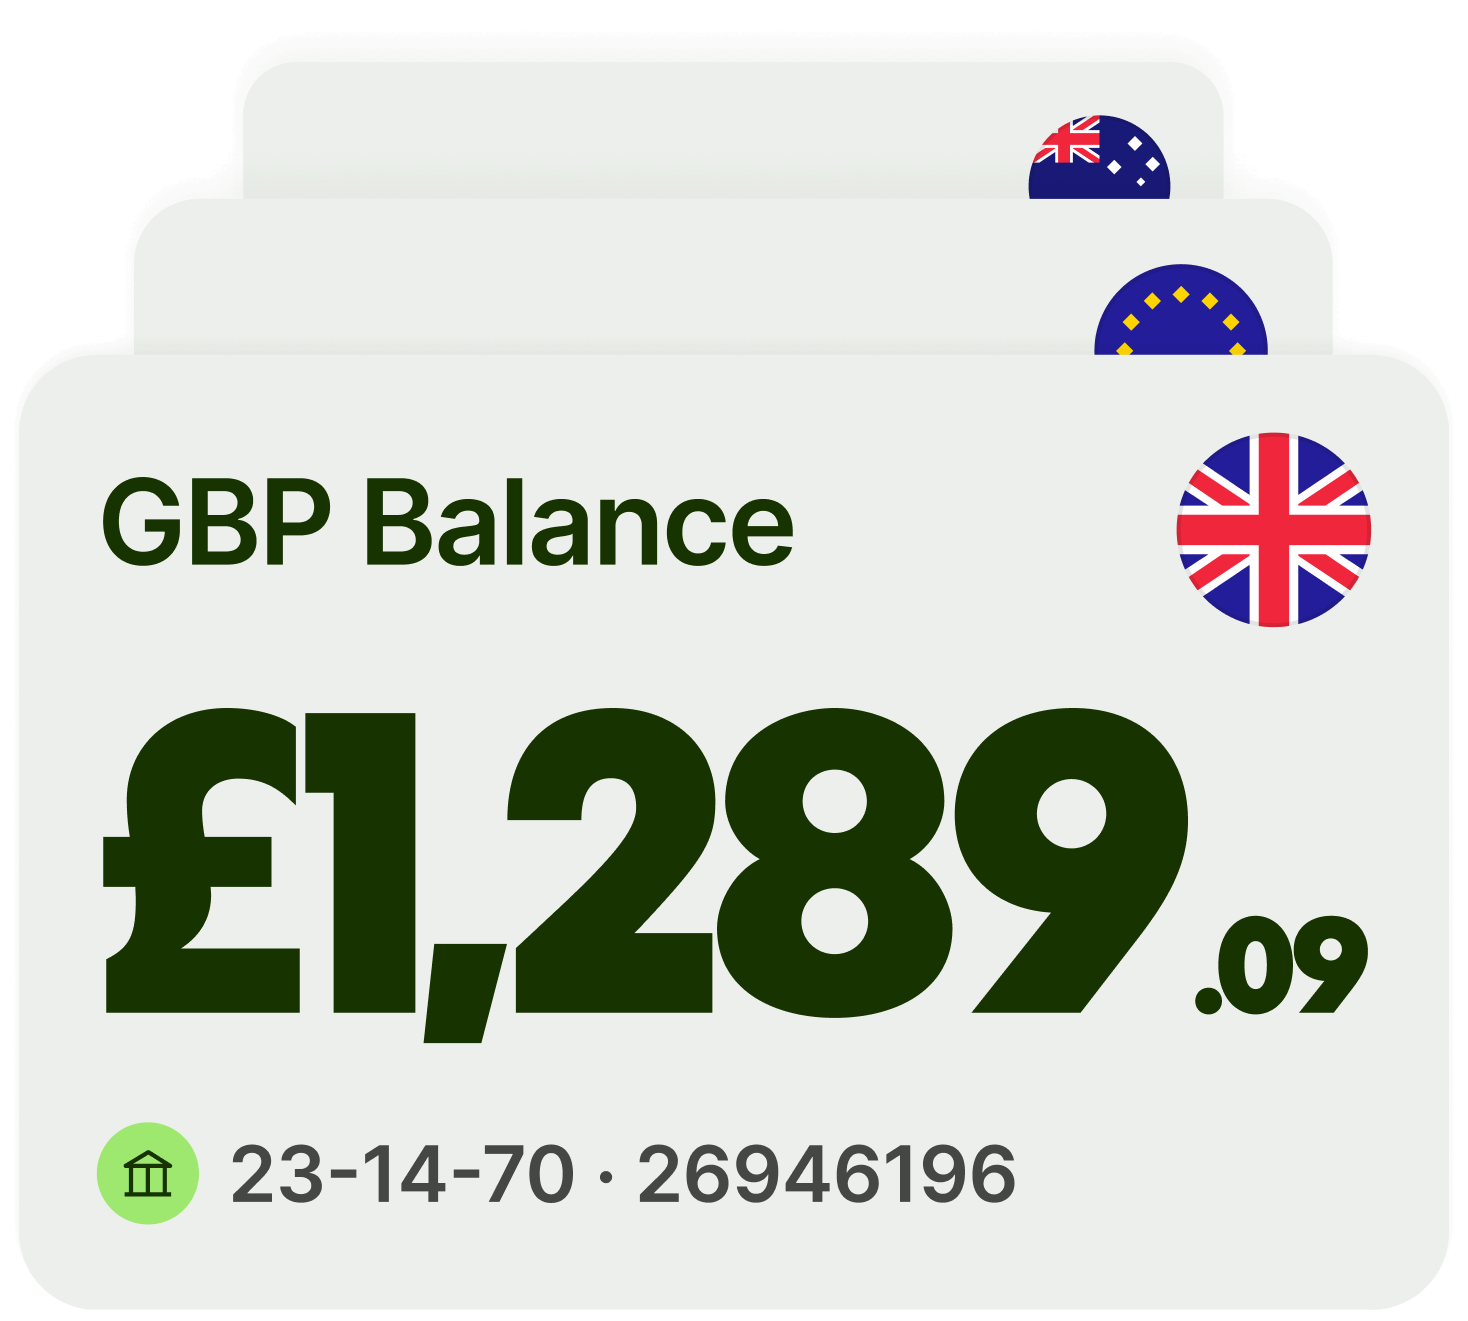 Notification showing GBP Balance, with the total value £1,289, and GBP account details.